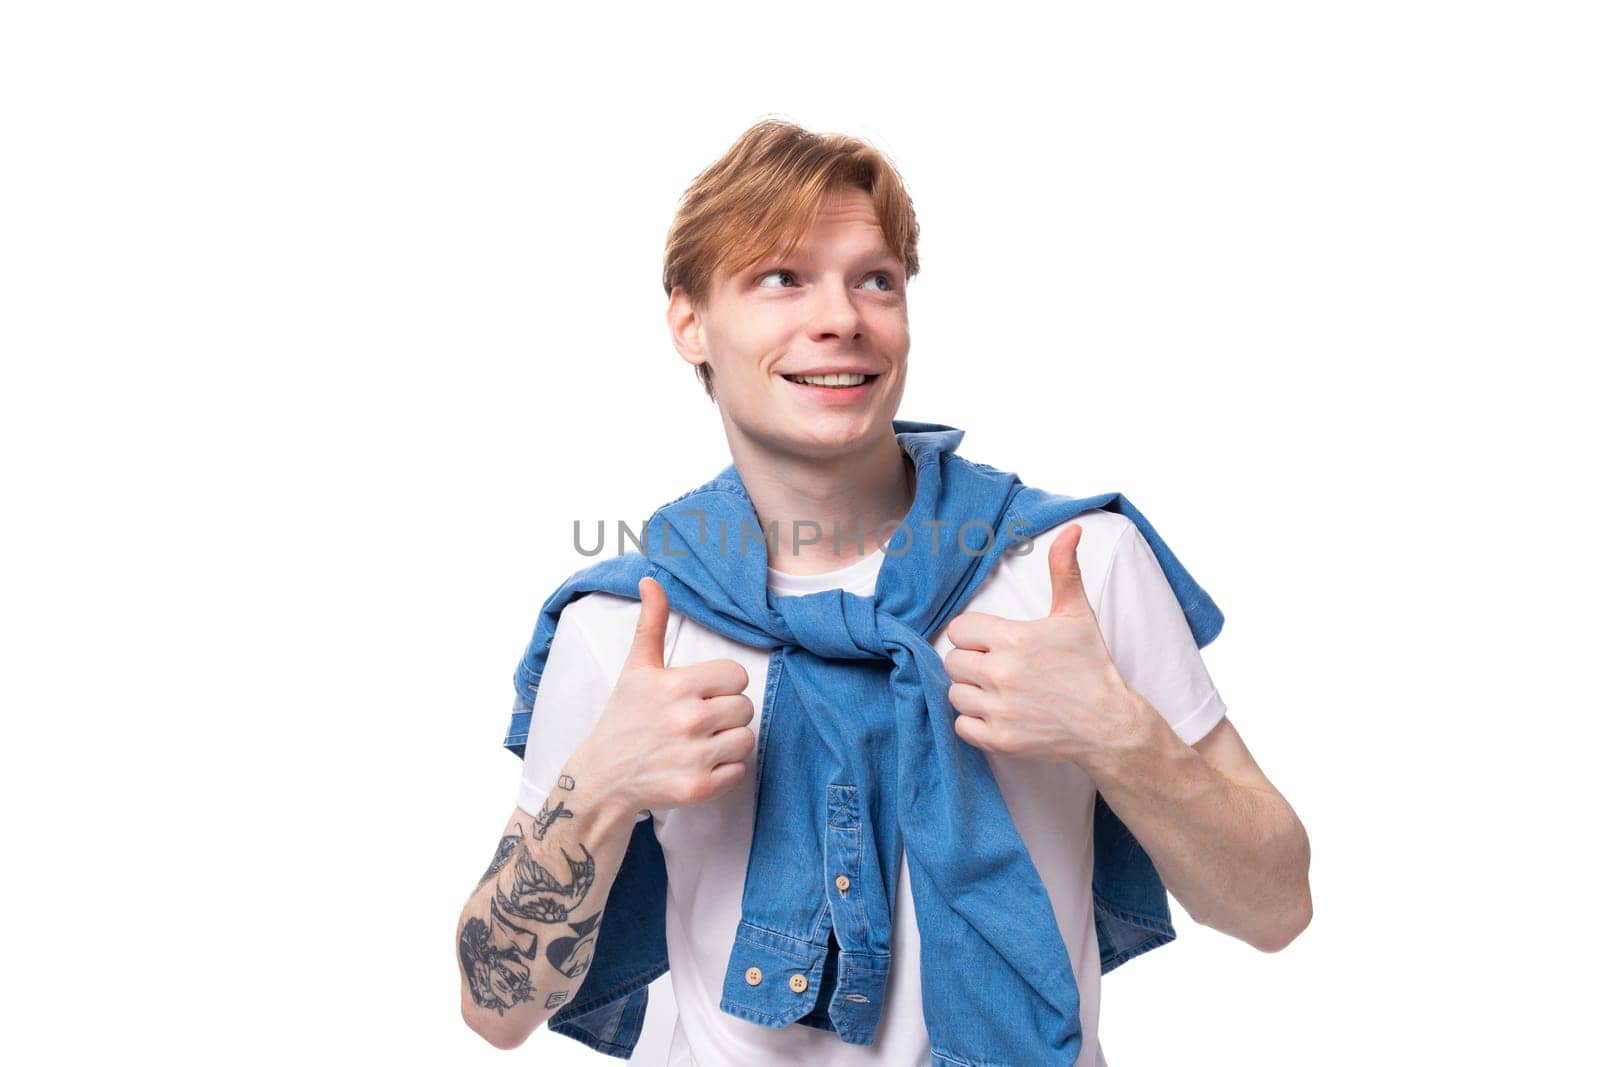 young fashionable caucasian guy with short red hair with a tattoo on his arms is dressed in a white t-shirt on a white background with copy space.